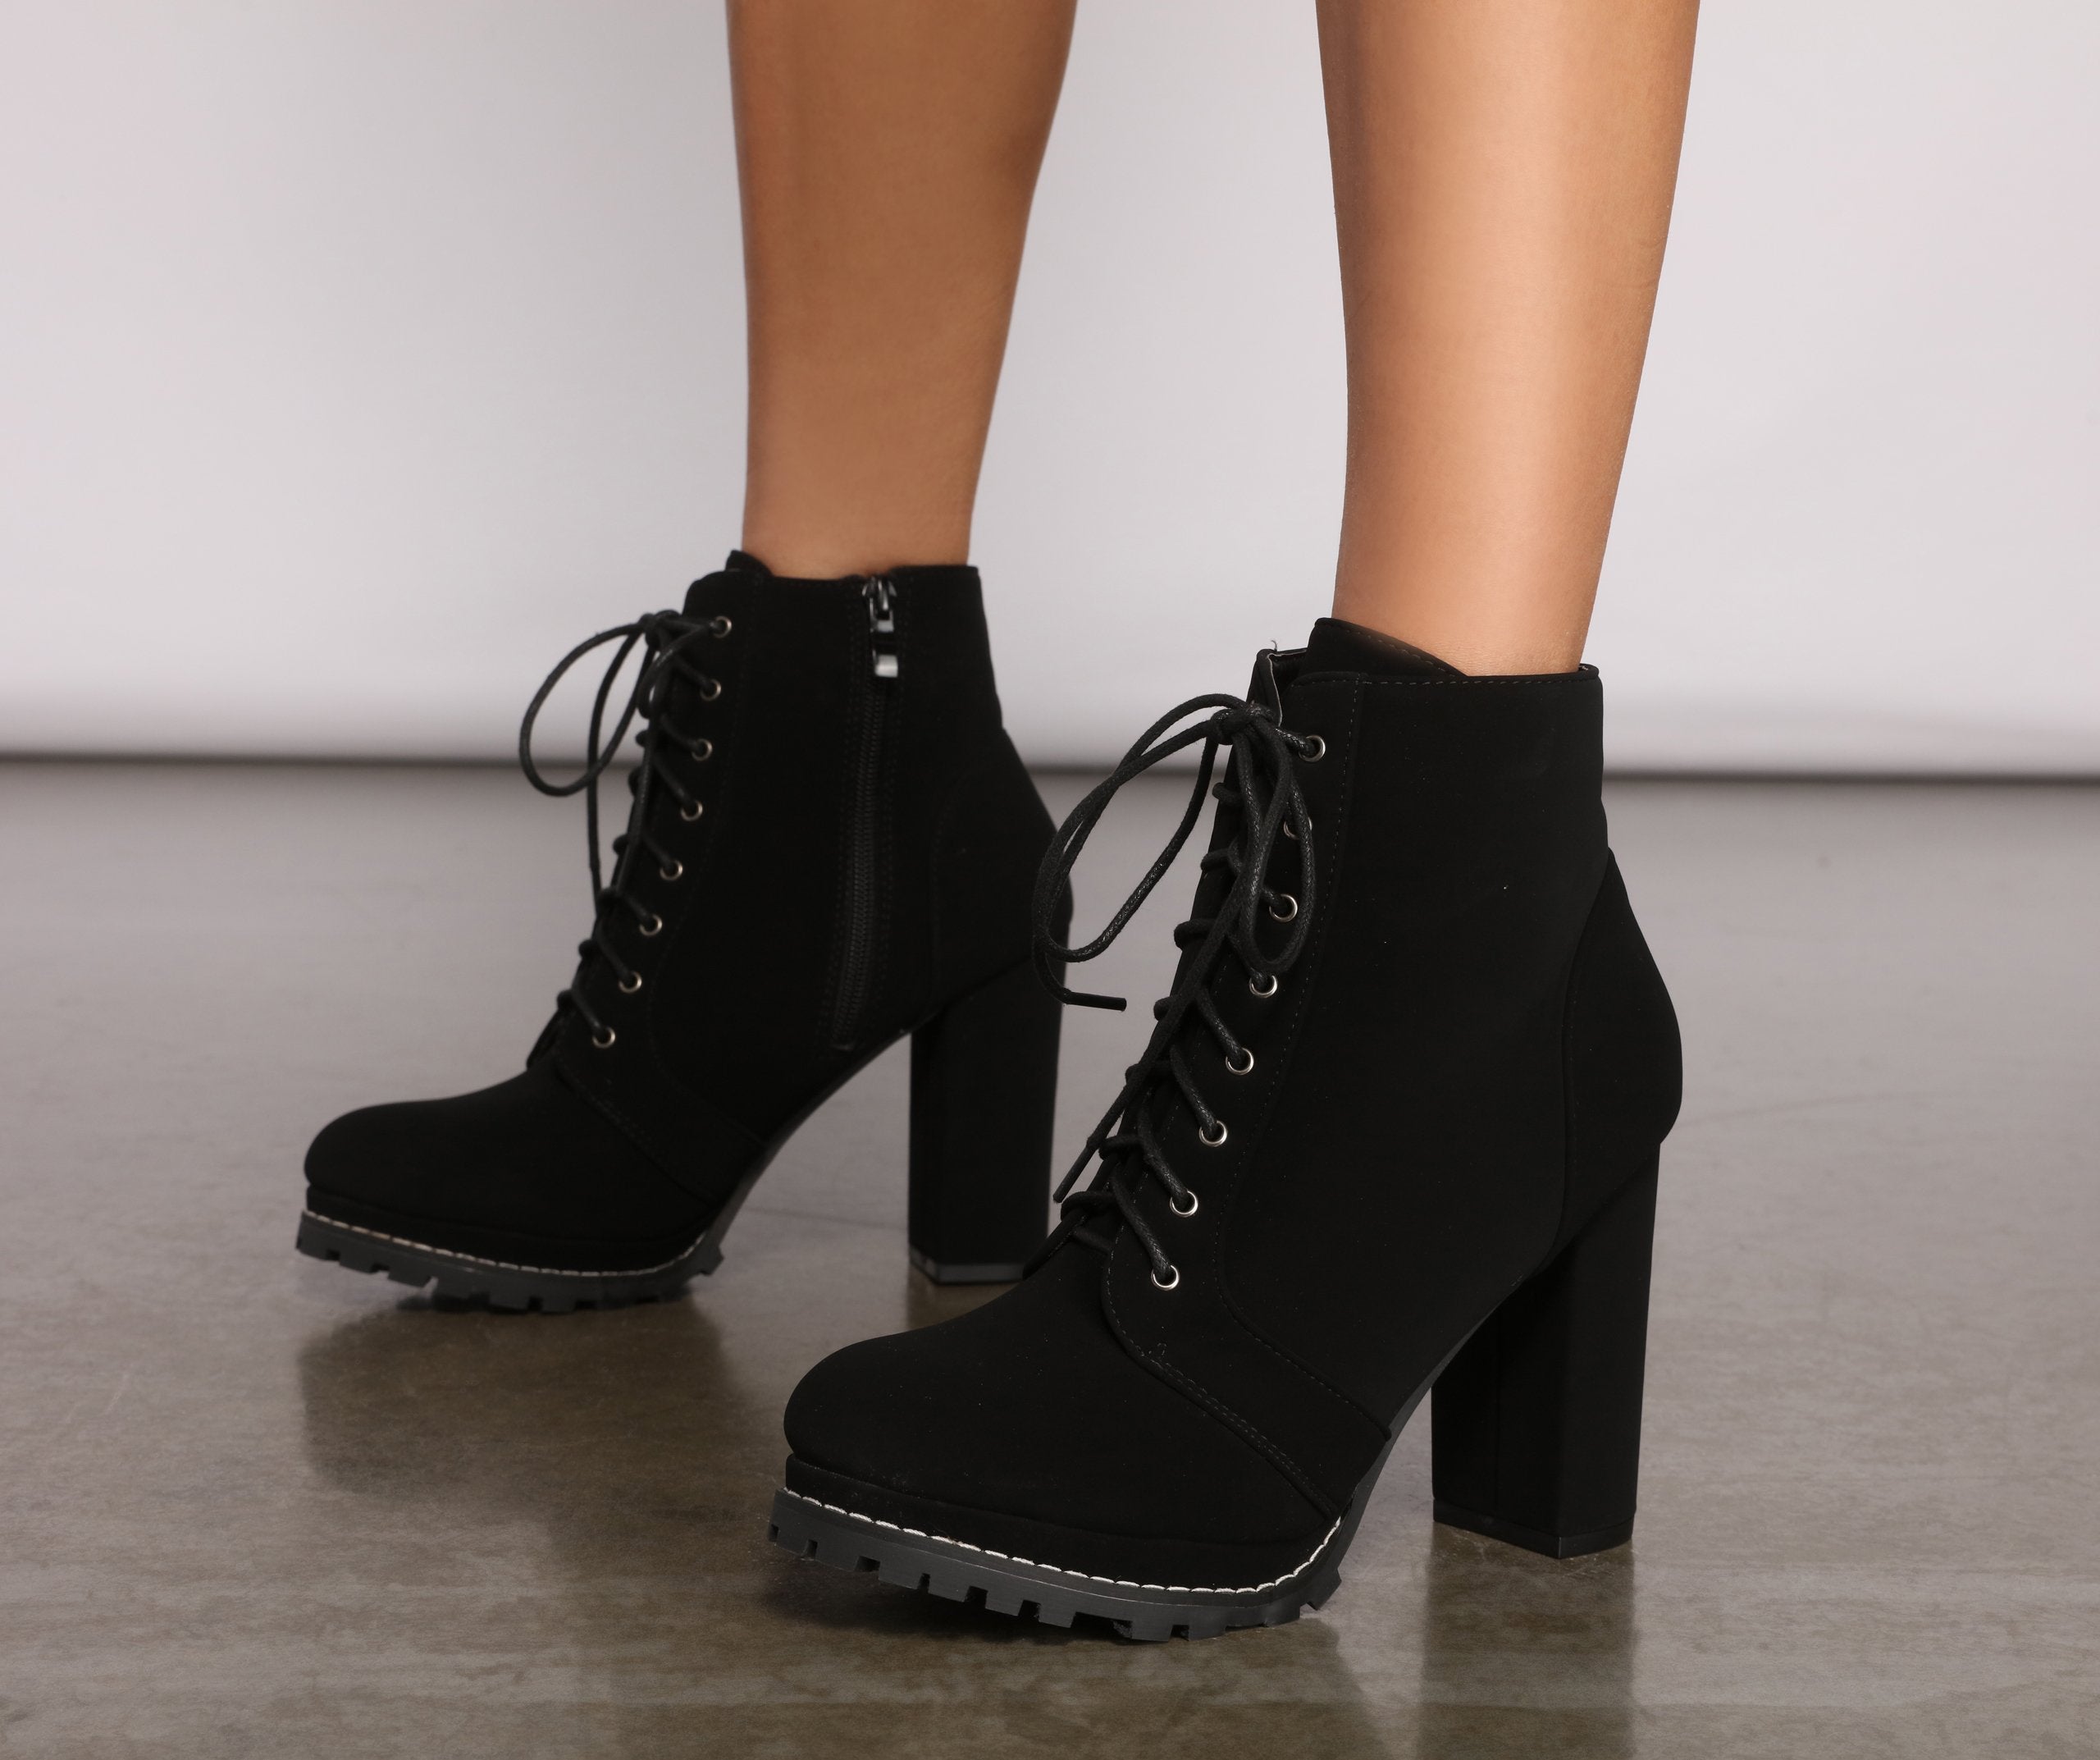 Effortlessly Chic Lace-Up Lug Sole Booties - Lady Occasions